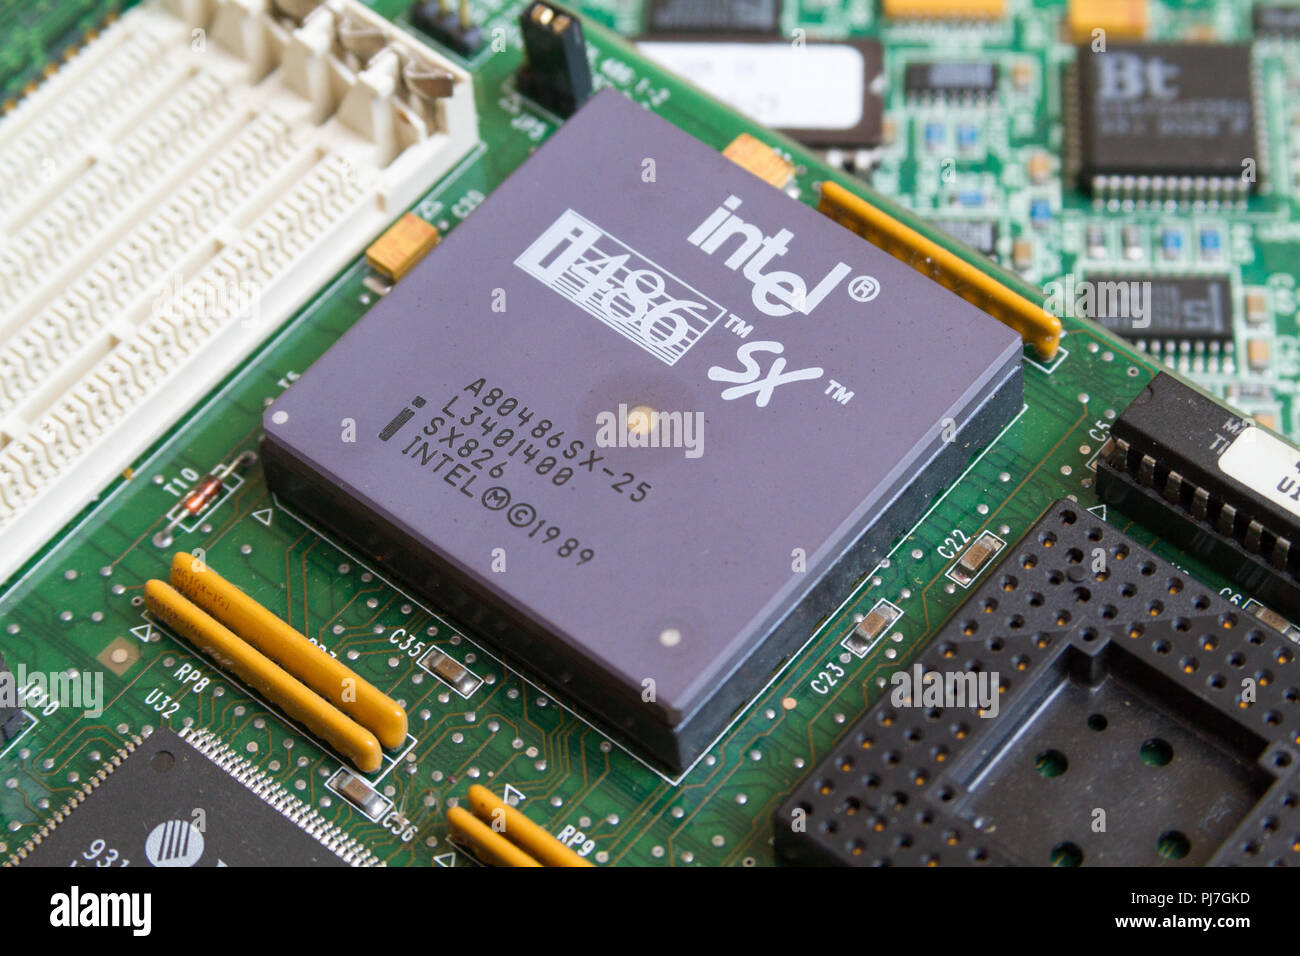 An Intel i486 SX (80486SX) processor (CPU) from 1989 in a socket on a motherboard. Caklov, Slovakia. 2018/7/28. Stock Photo